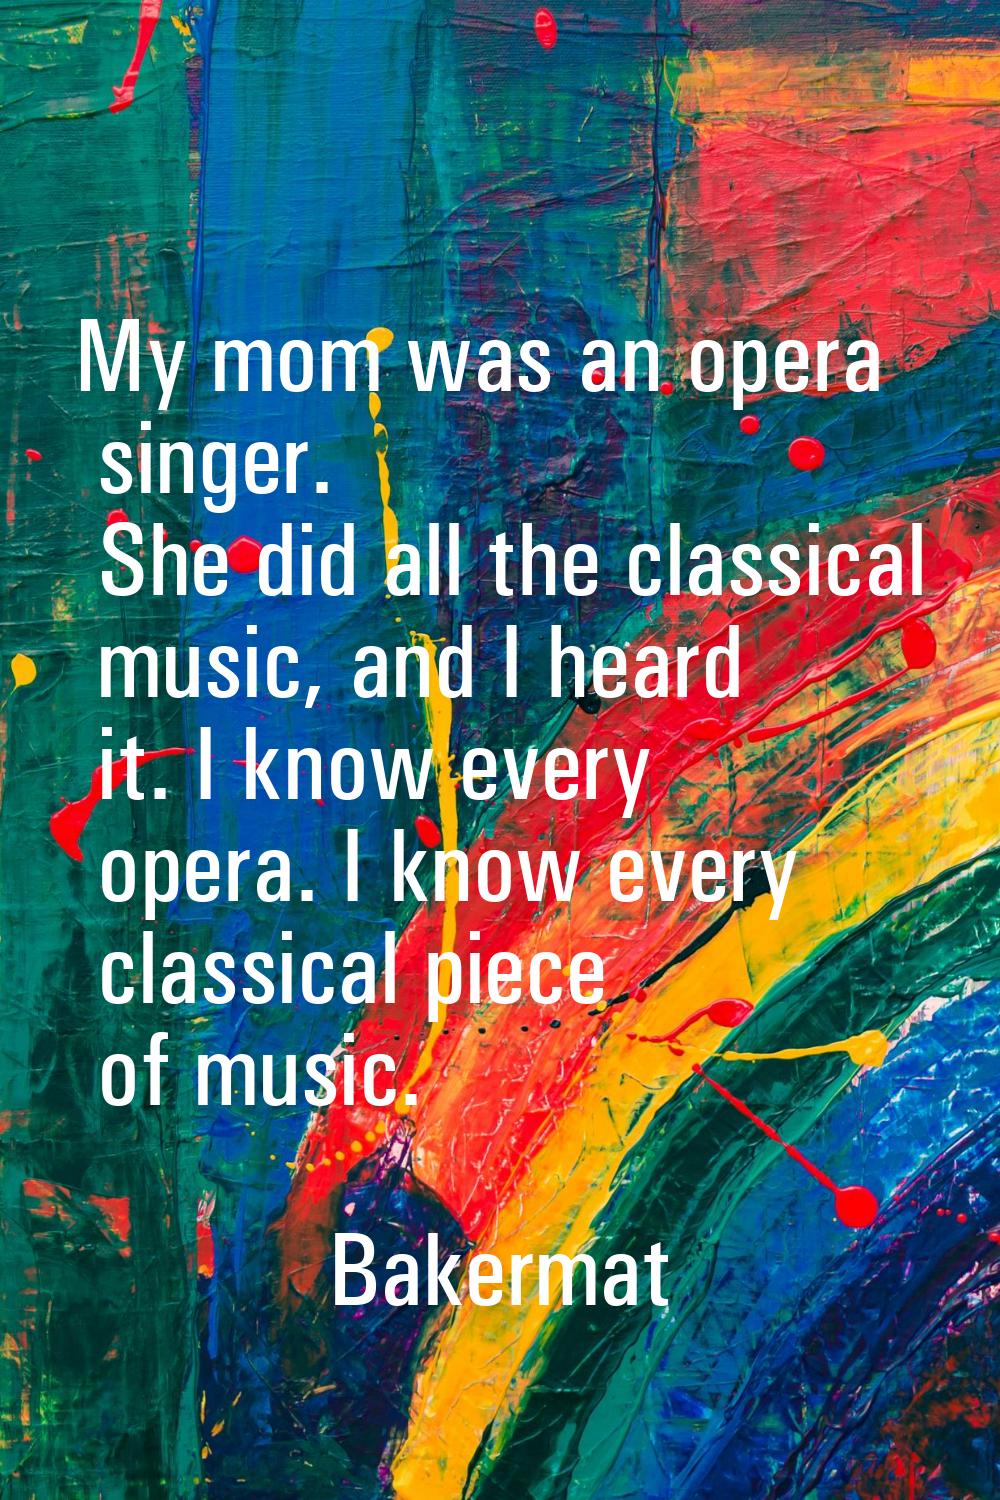 My mom was an opera singer. She did all the classical music, and I heard it. I know every opera. I 